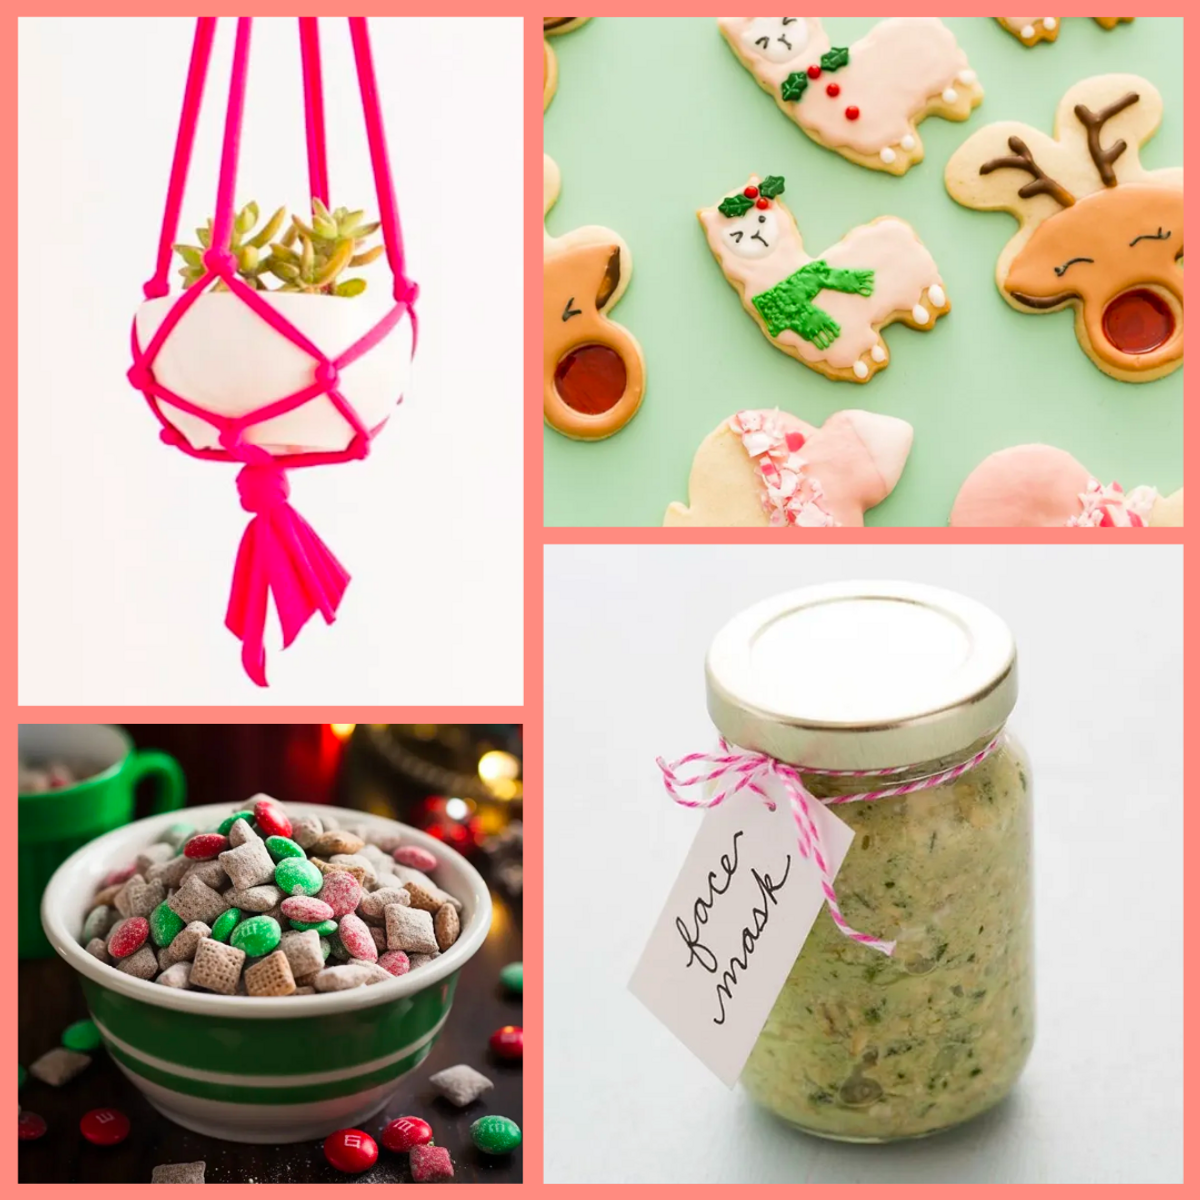 ideas for homemade gifts including food gifts, DIY beauty gifts, and DIY home decor gifts